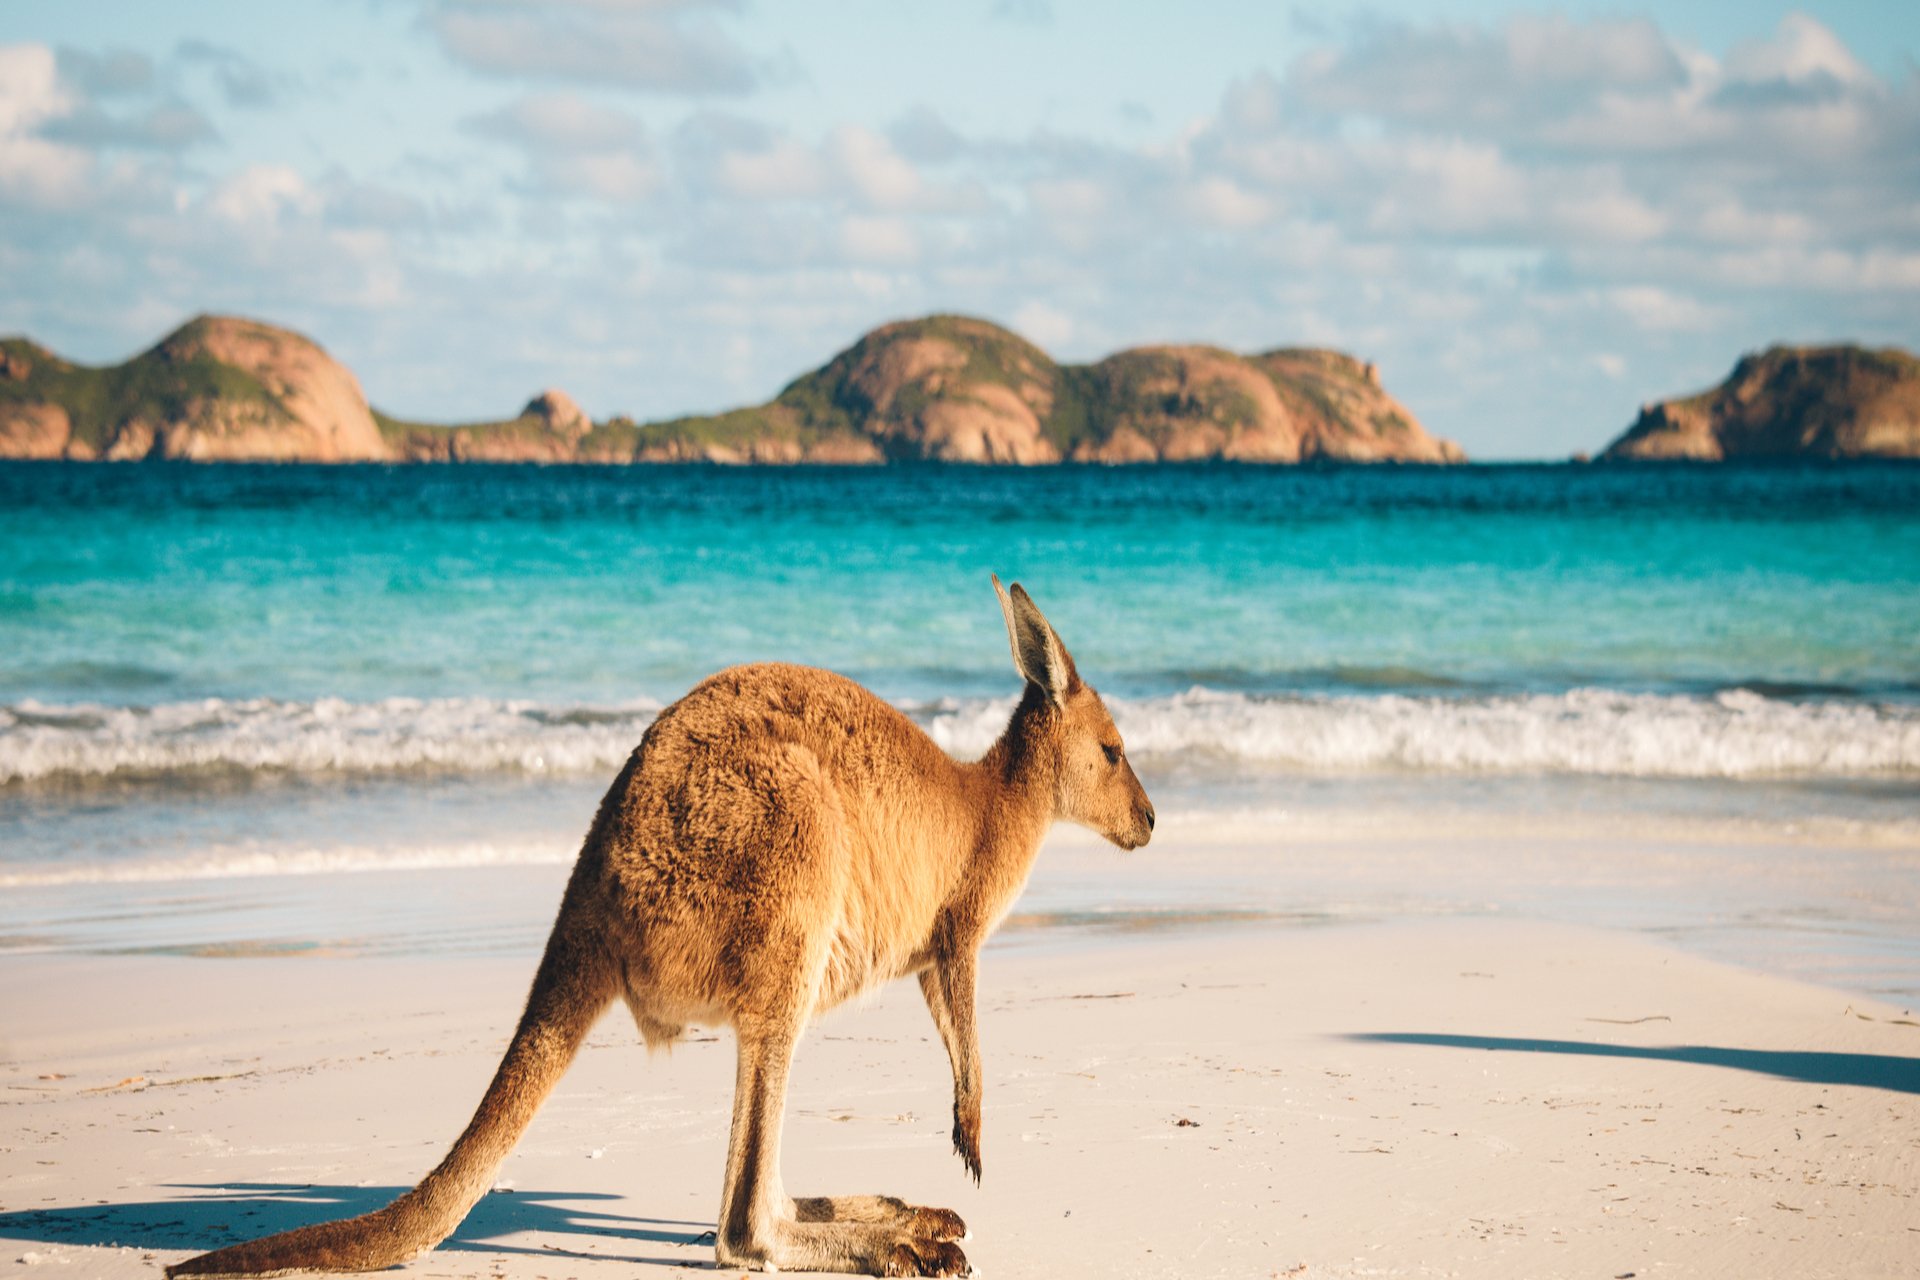 Lucky Bay: You can see kangaroos lying in this summer paradise